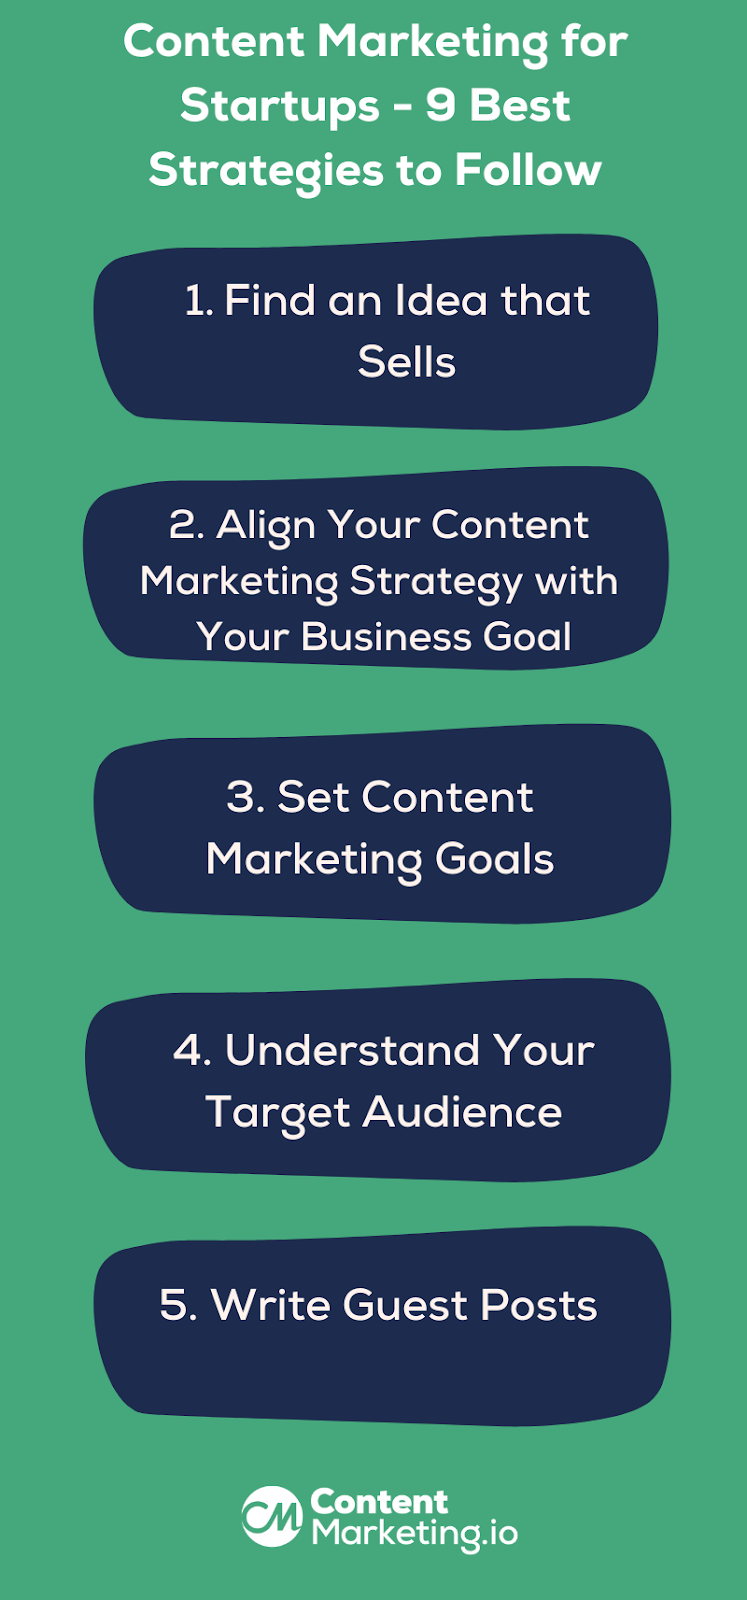 Content Marketing for Startups - Best Strategies to Follow